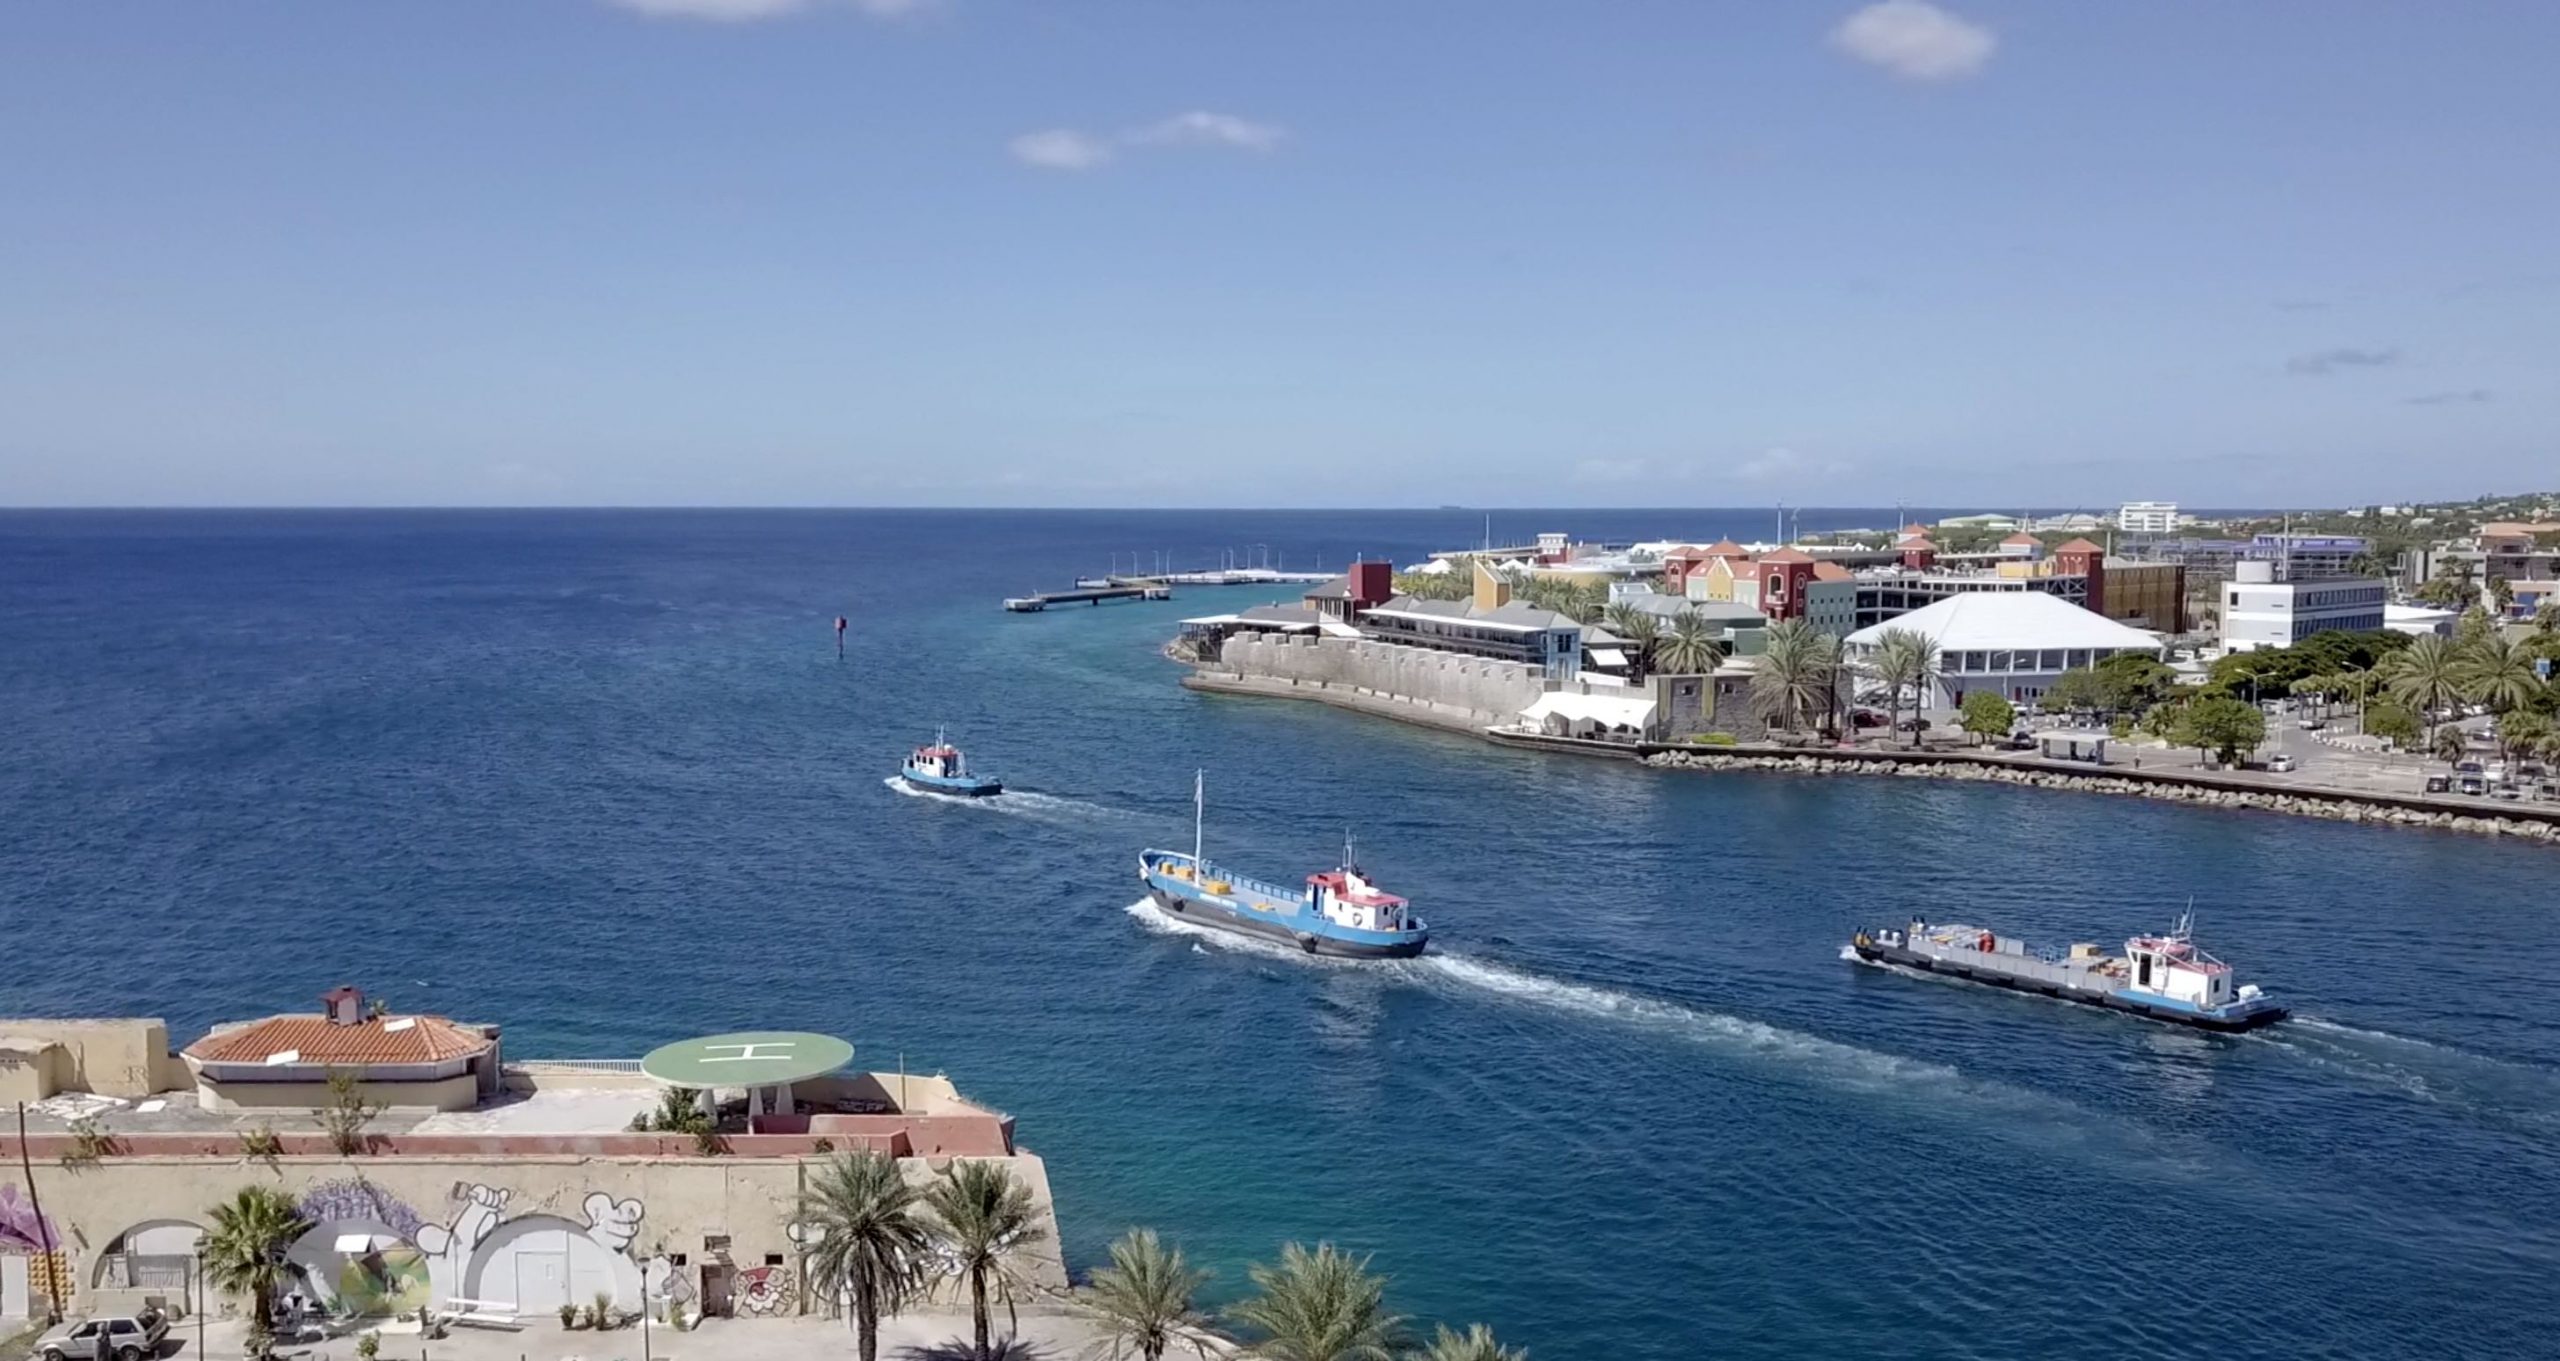 Curaçao ports services are provided by SeaHarbor Agencies